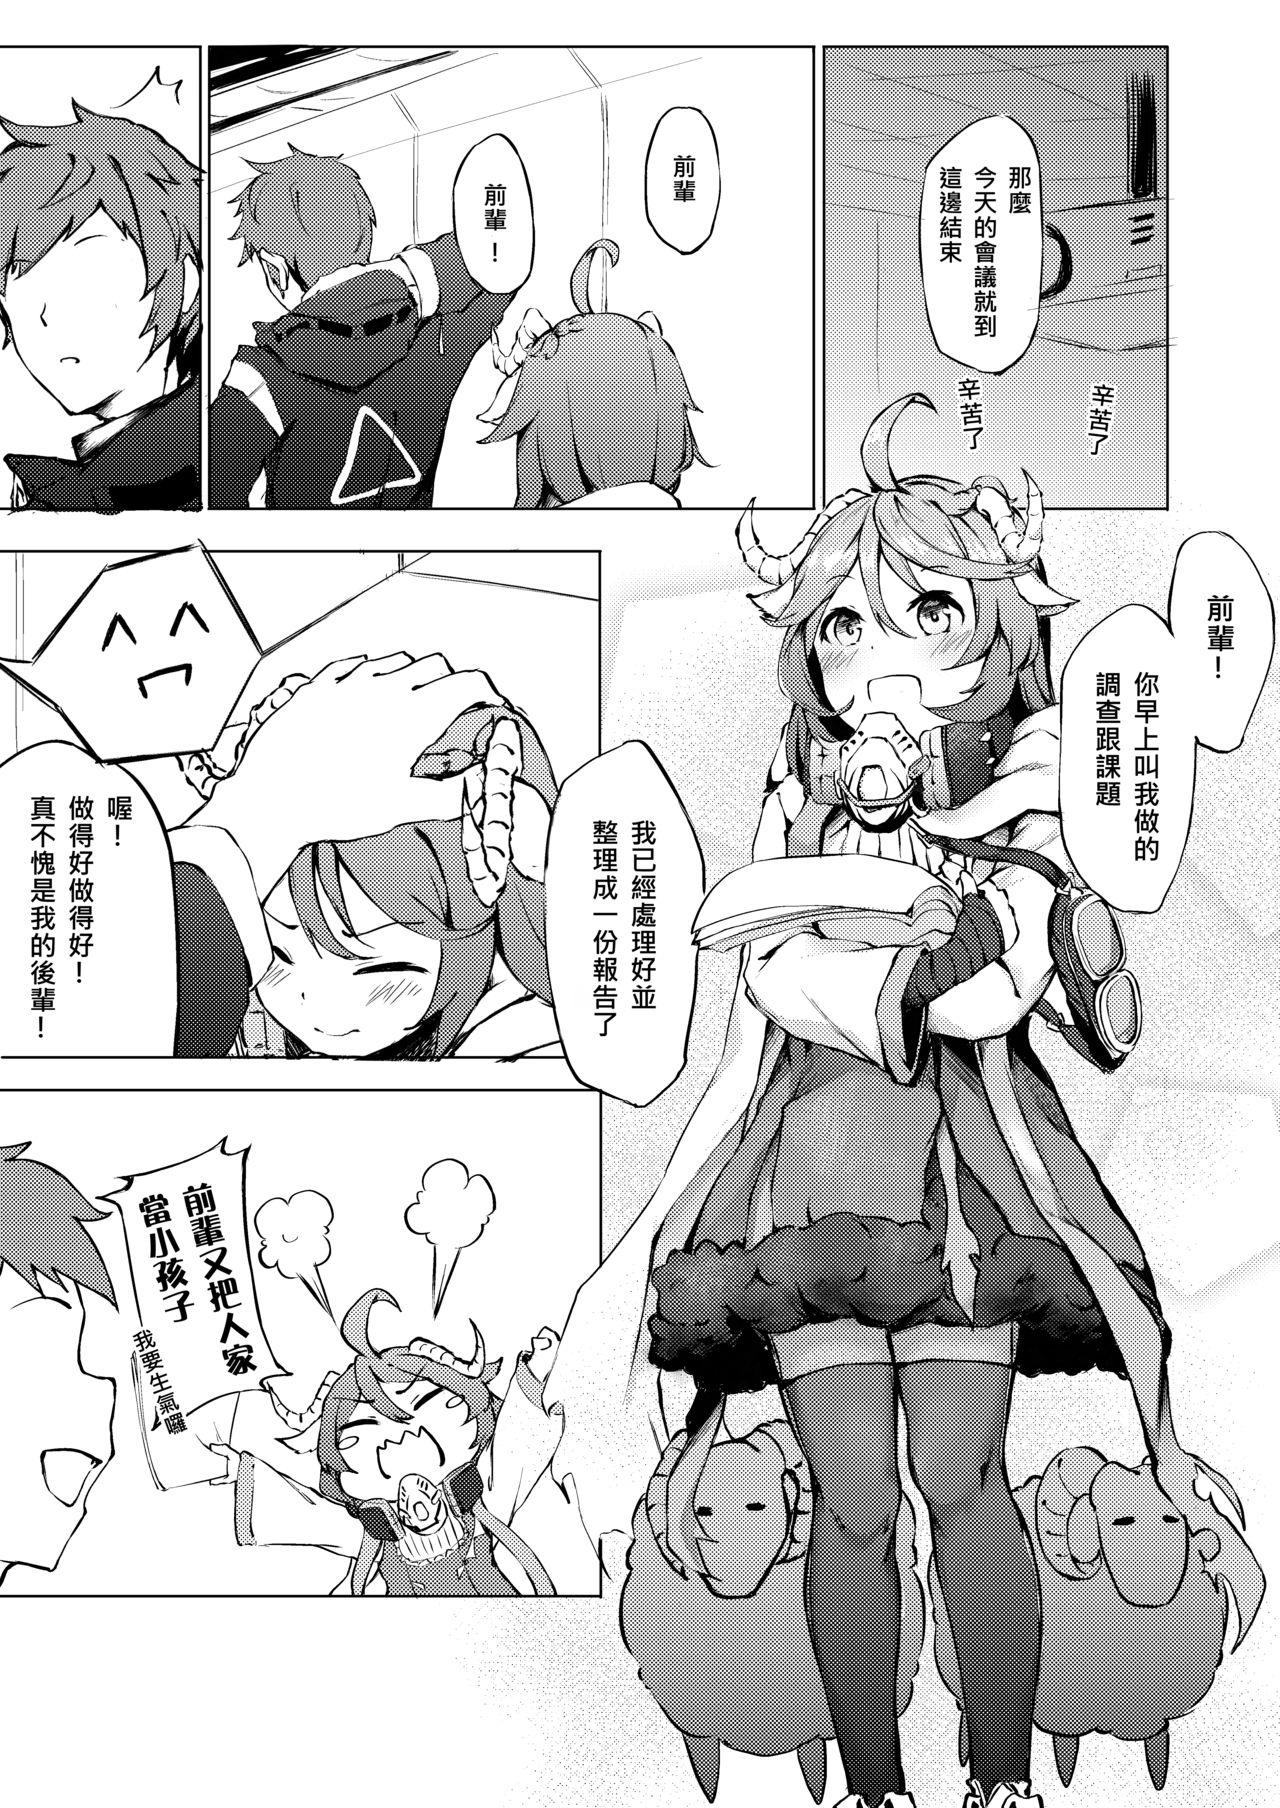 Cruising 不存在的聲音 | The Nonexistence Voice - Arknights Cumshots - Page 5